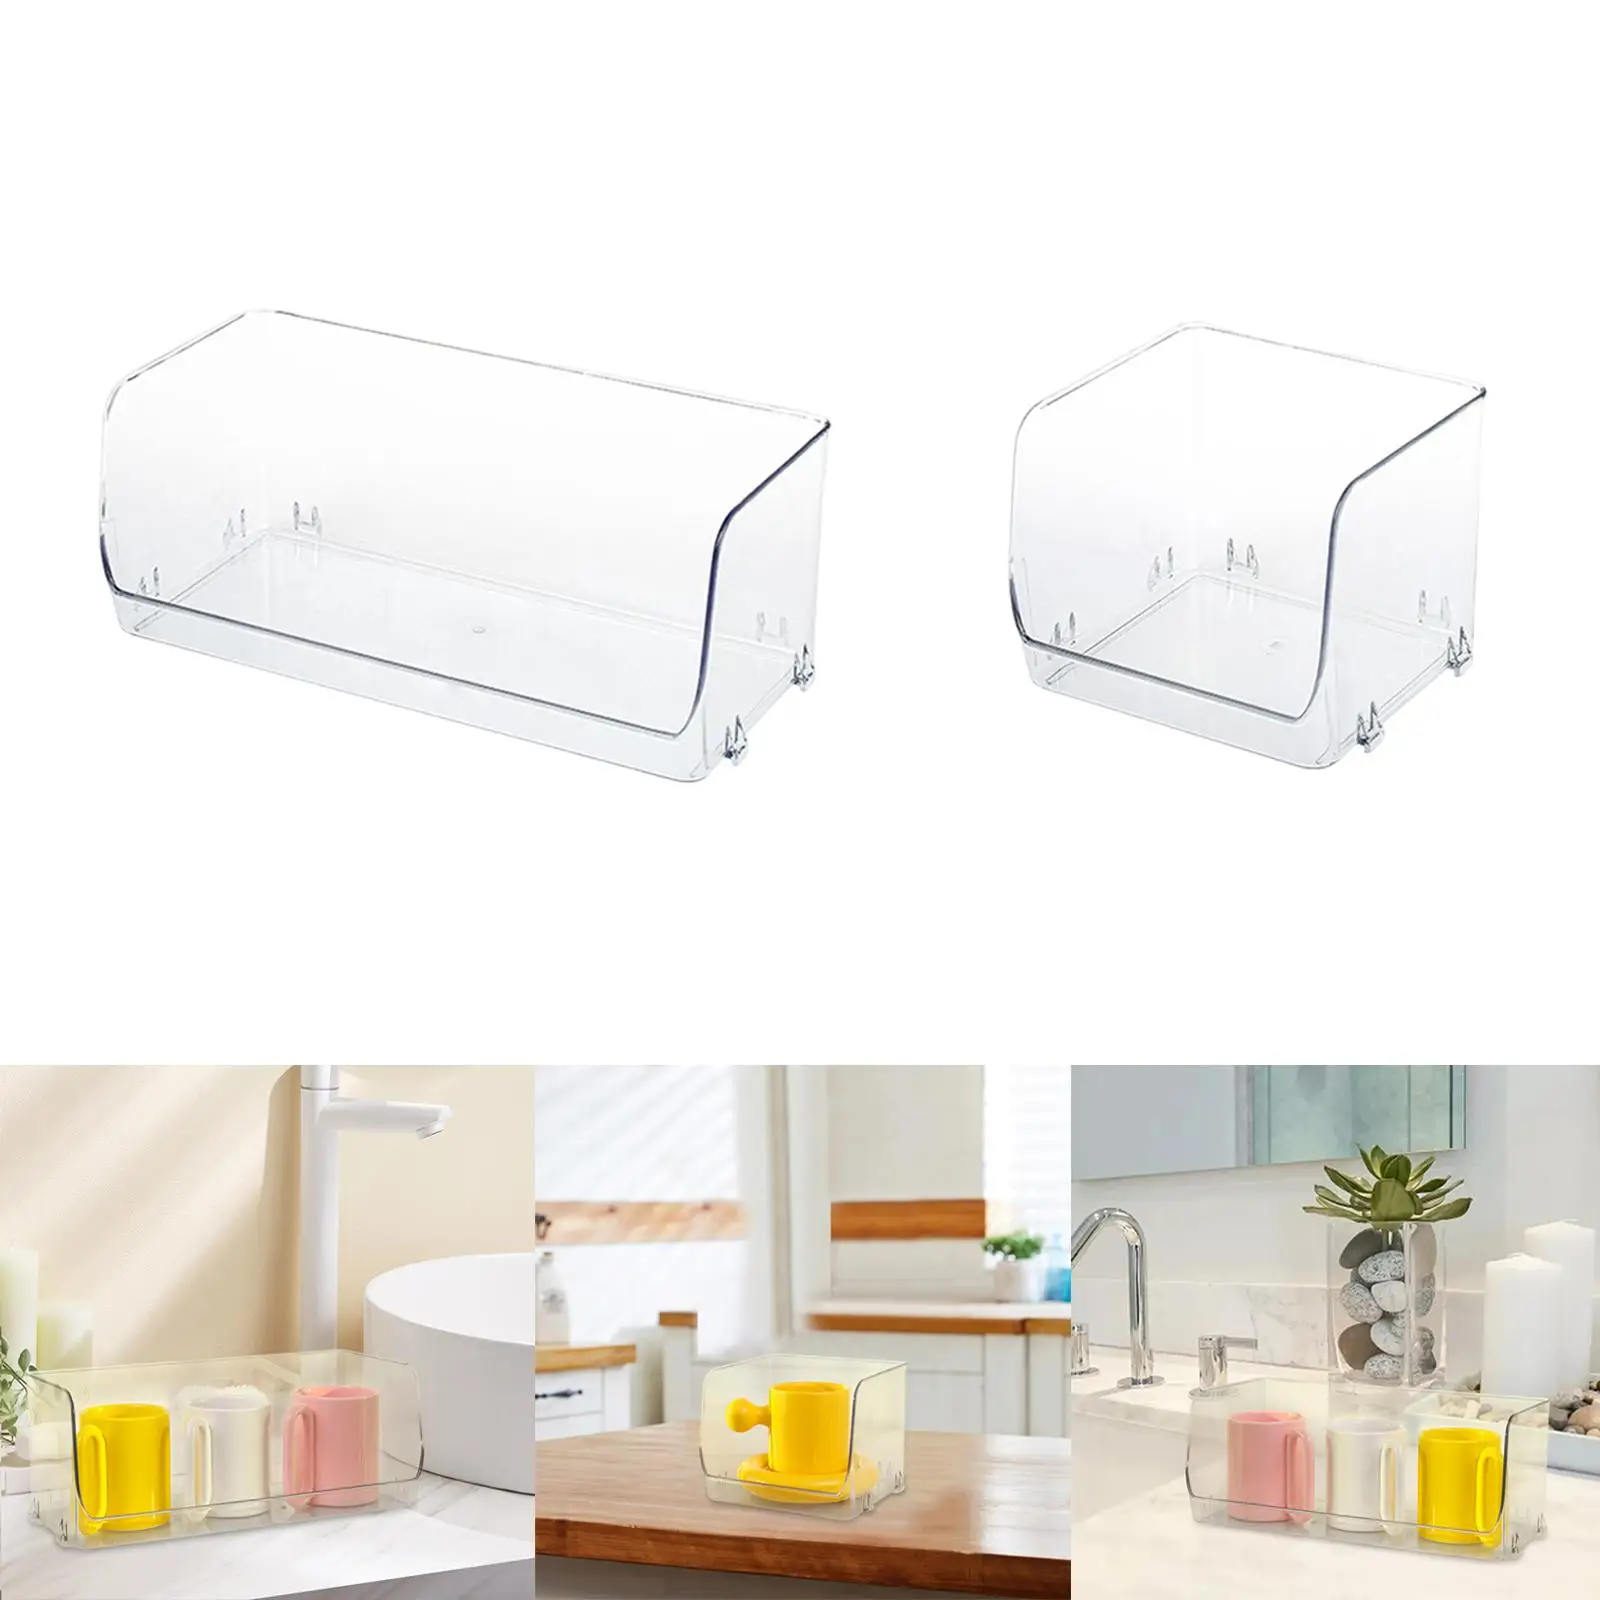 Transparent Cup Storage Rack Glass Cup Organizer Mug Holder Multifunctional Storage Stand for Desktop Countertop Pantry Office